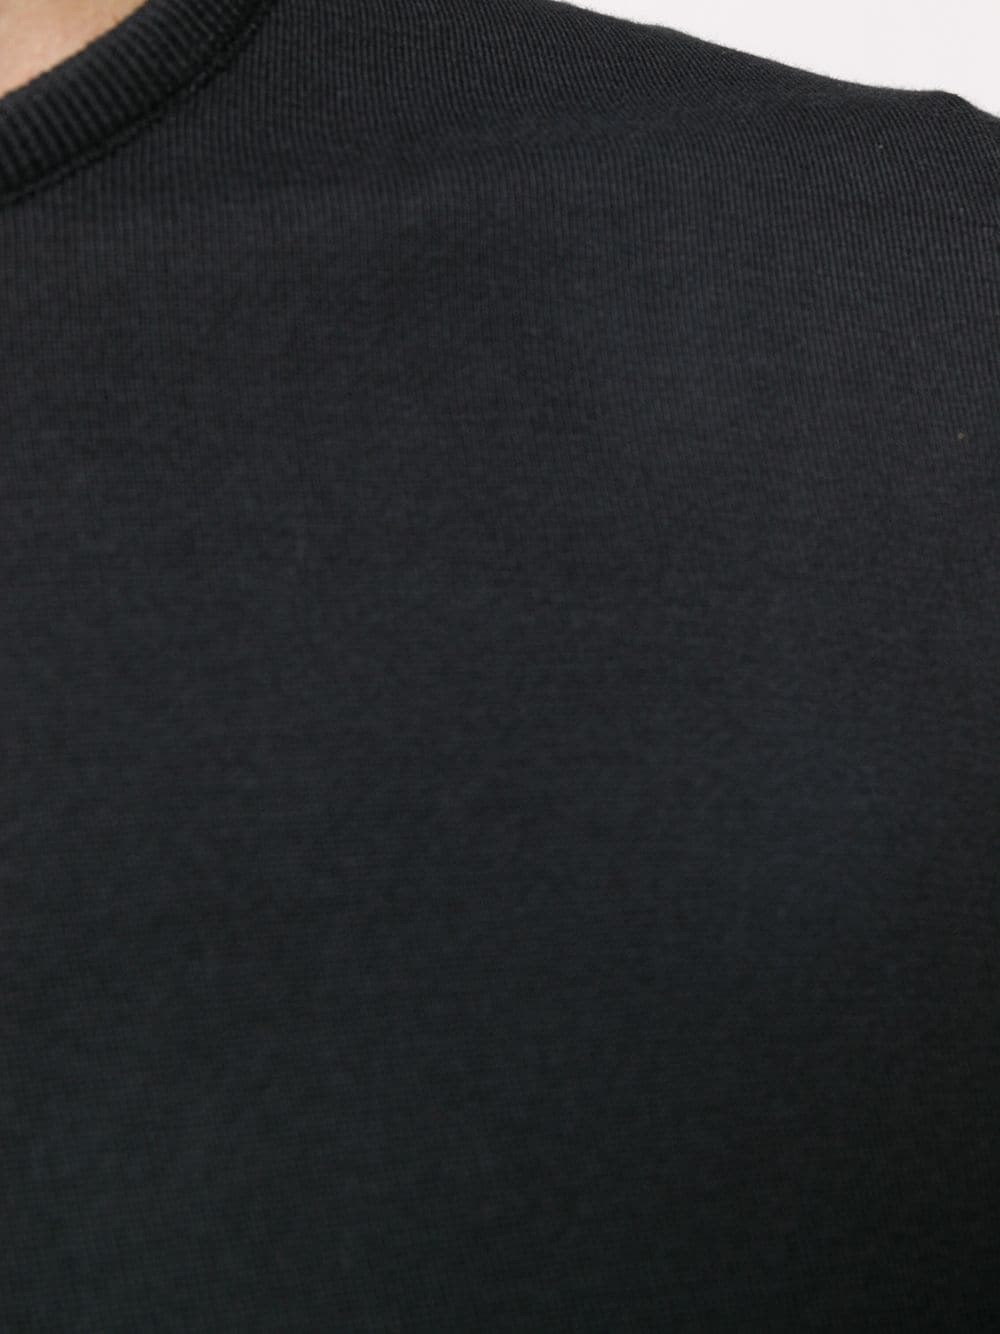 john smedley HATFIELD BLACK PULLOVER available on montiboutique.com - 52135